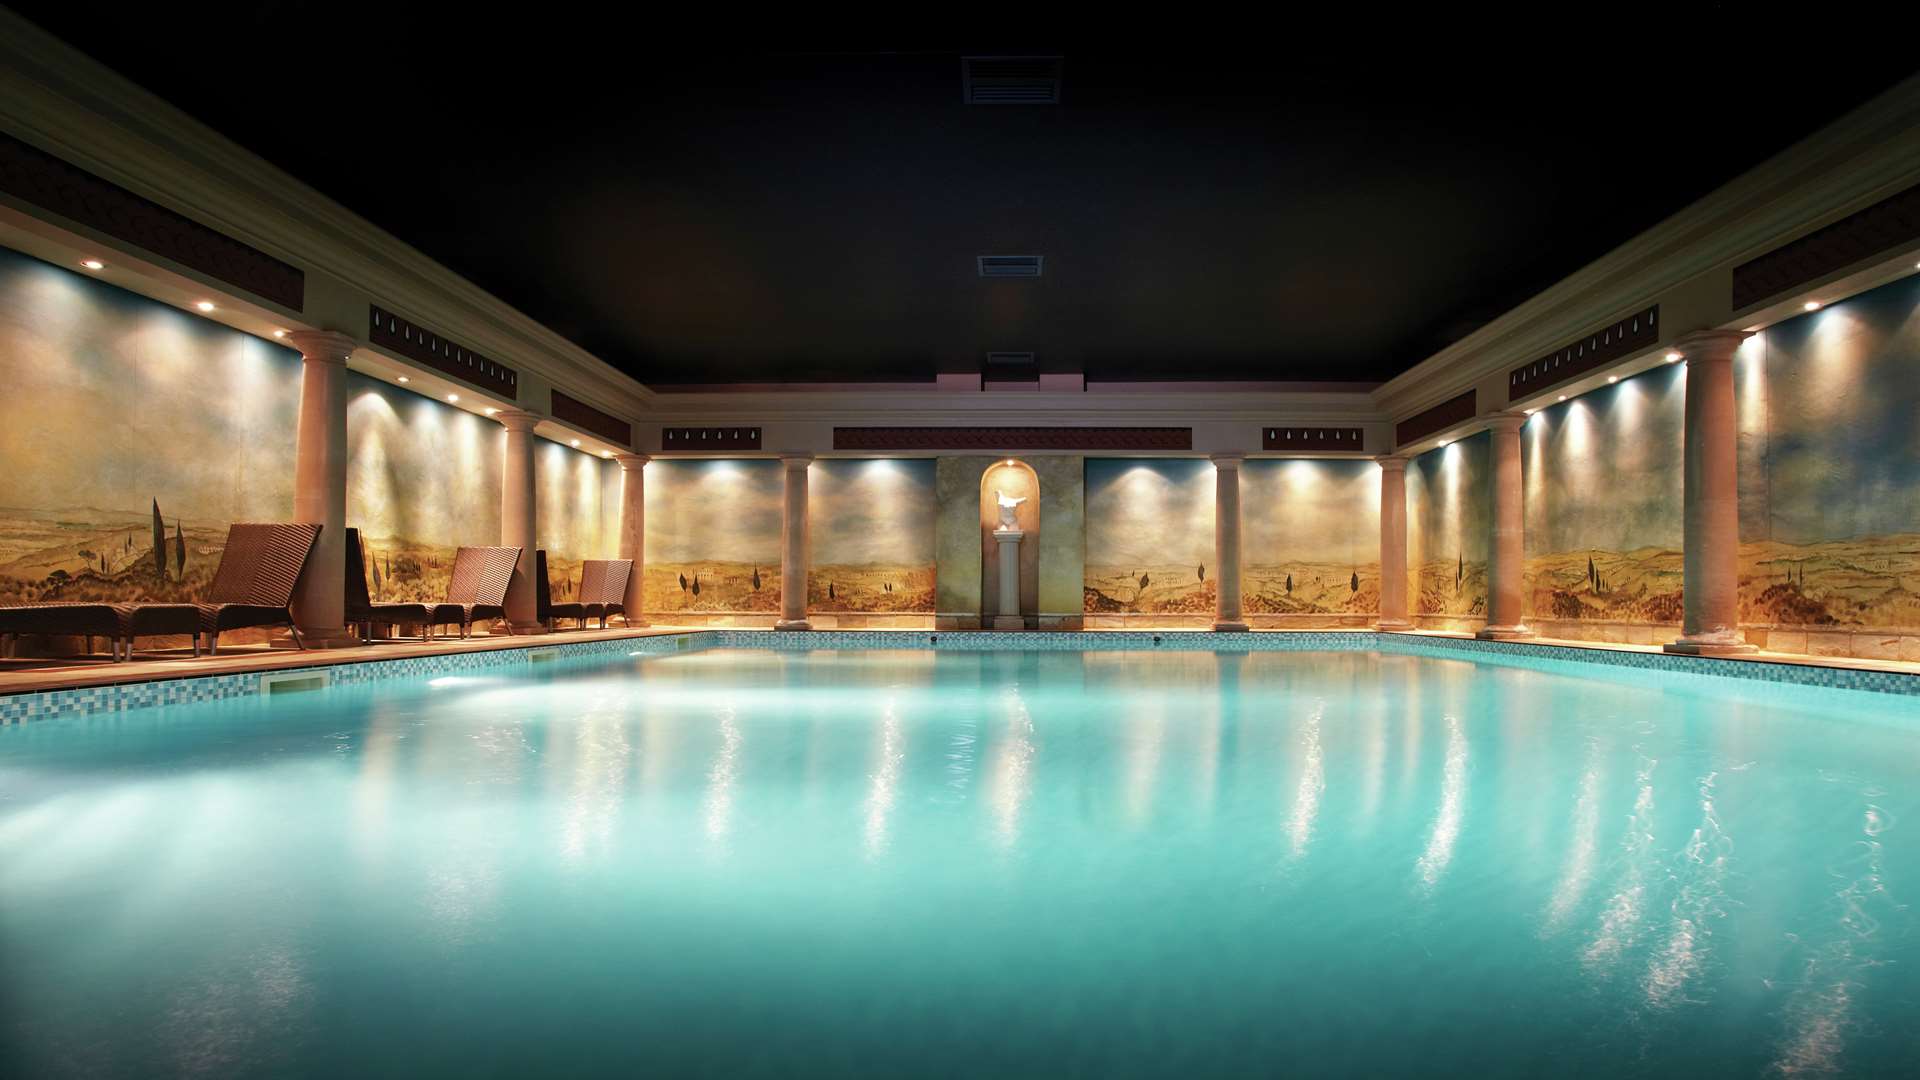 The pool at the luxury Utopia Spa at Rowhill Grange Hotel